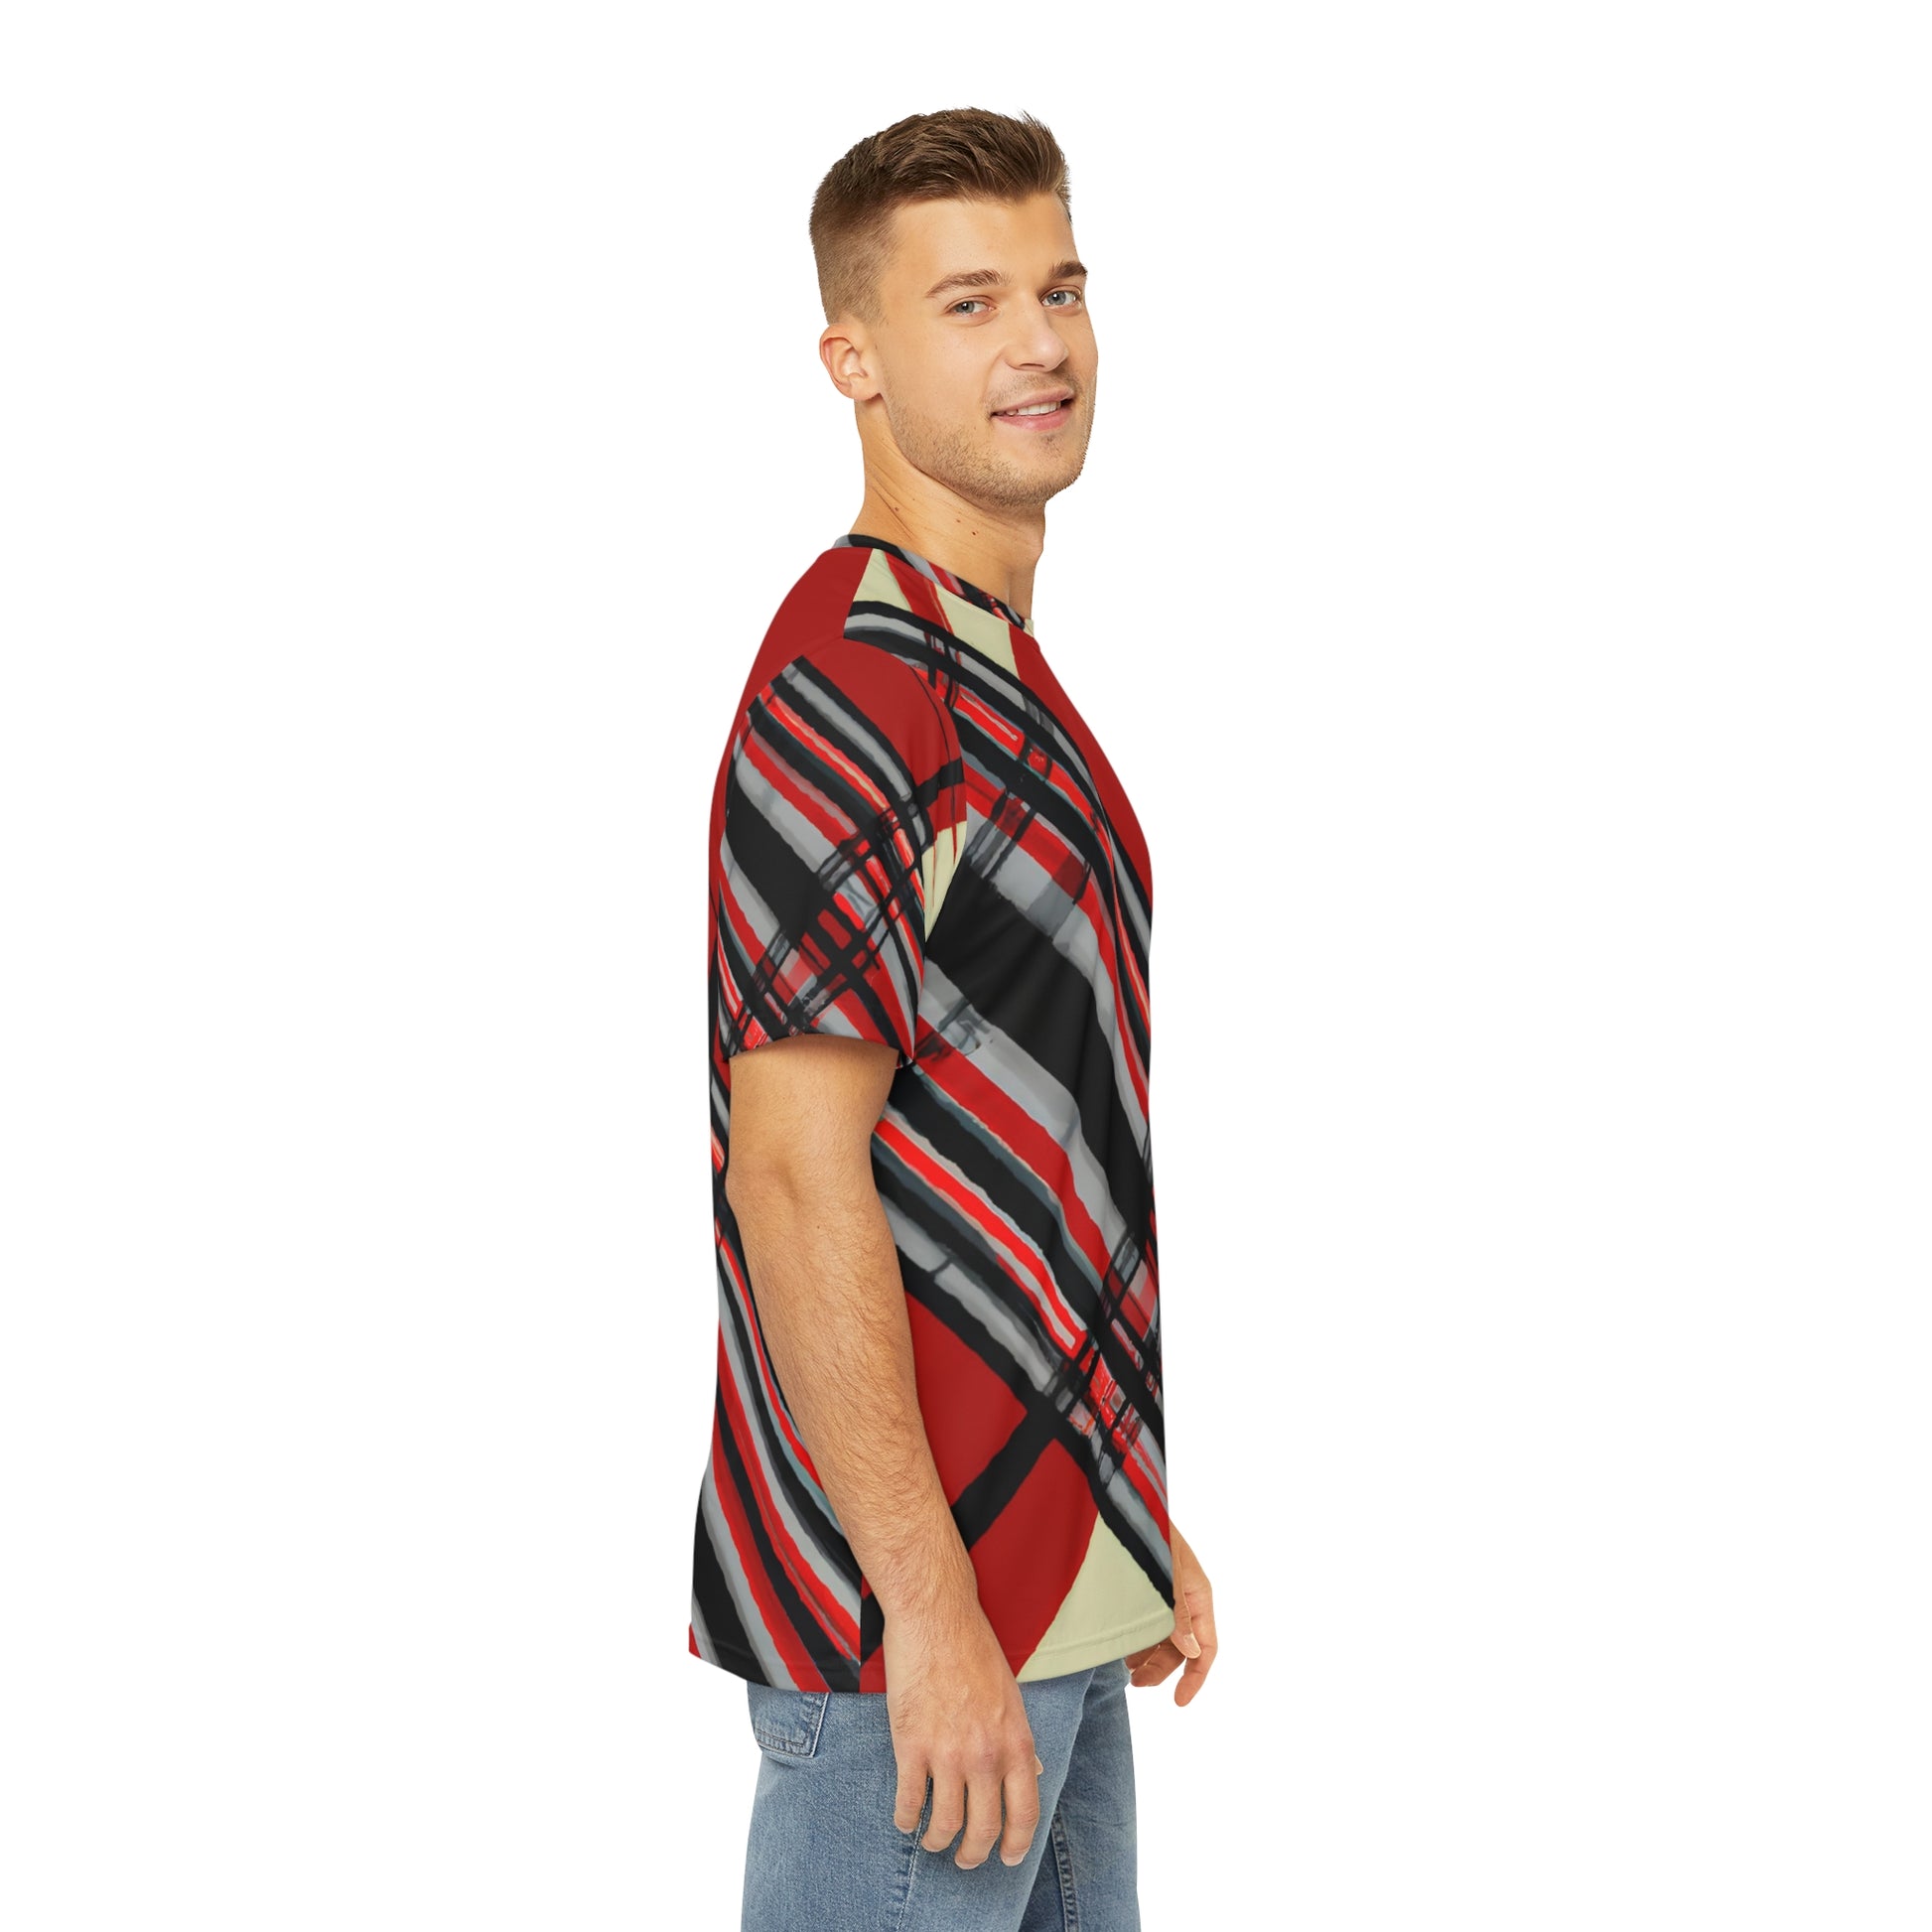 Side view of the Highland Lancer Veil Crewneck Pullover All-Over Print Short-Sleeved Shirt red black gray beige plaid pattern paired with casual denim pants worn by a white man